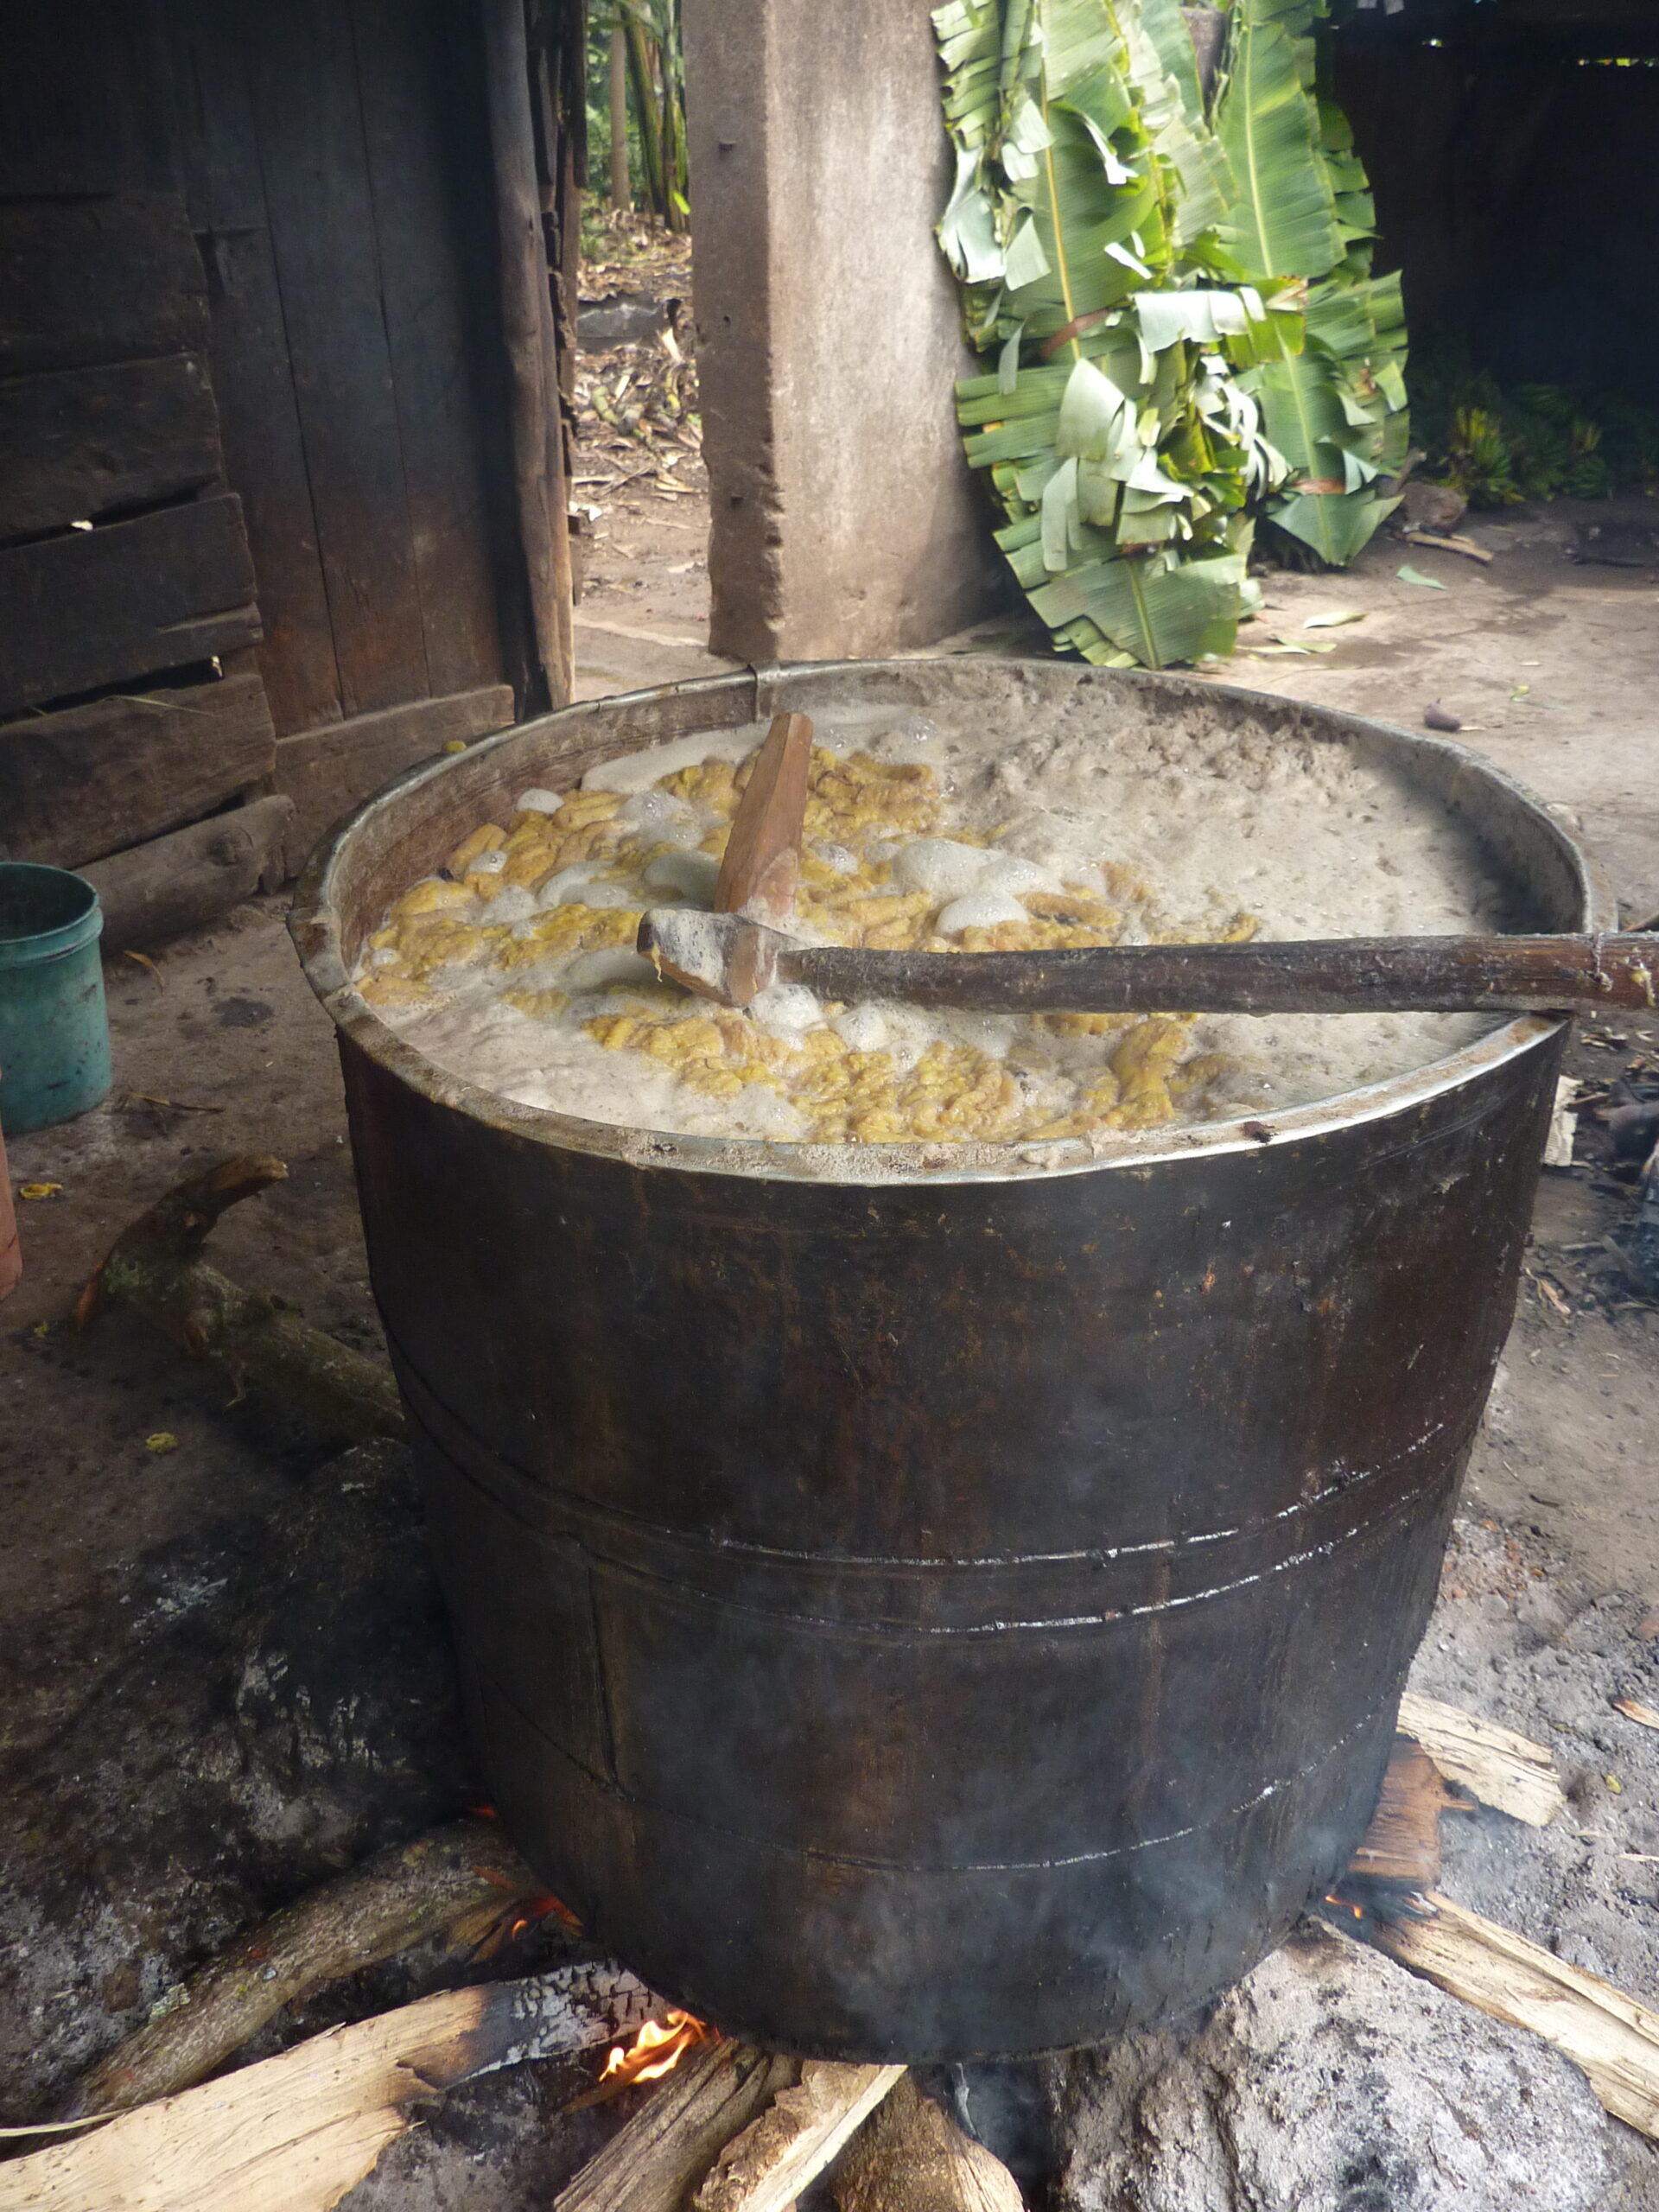 Photograph of millet in a large pot of hot water during the pombe brewing process. The pot is black and cylindrical in shape; there is wood burning underneath it and a wood mixer propped on its edge.